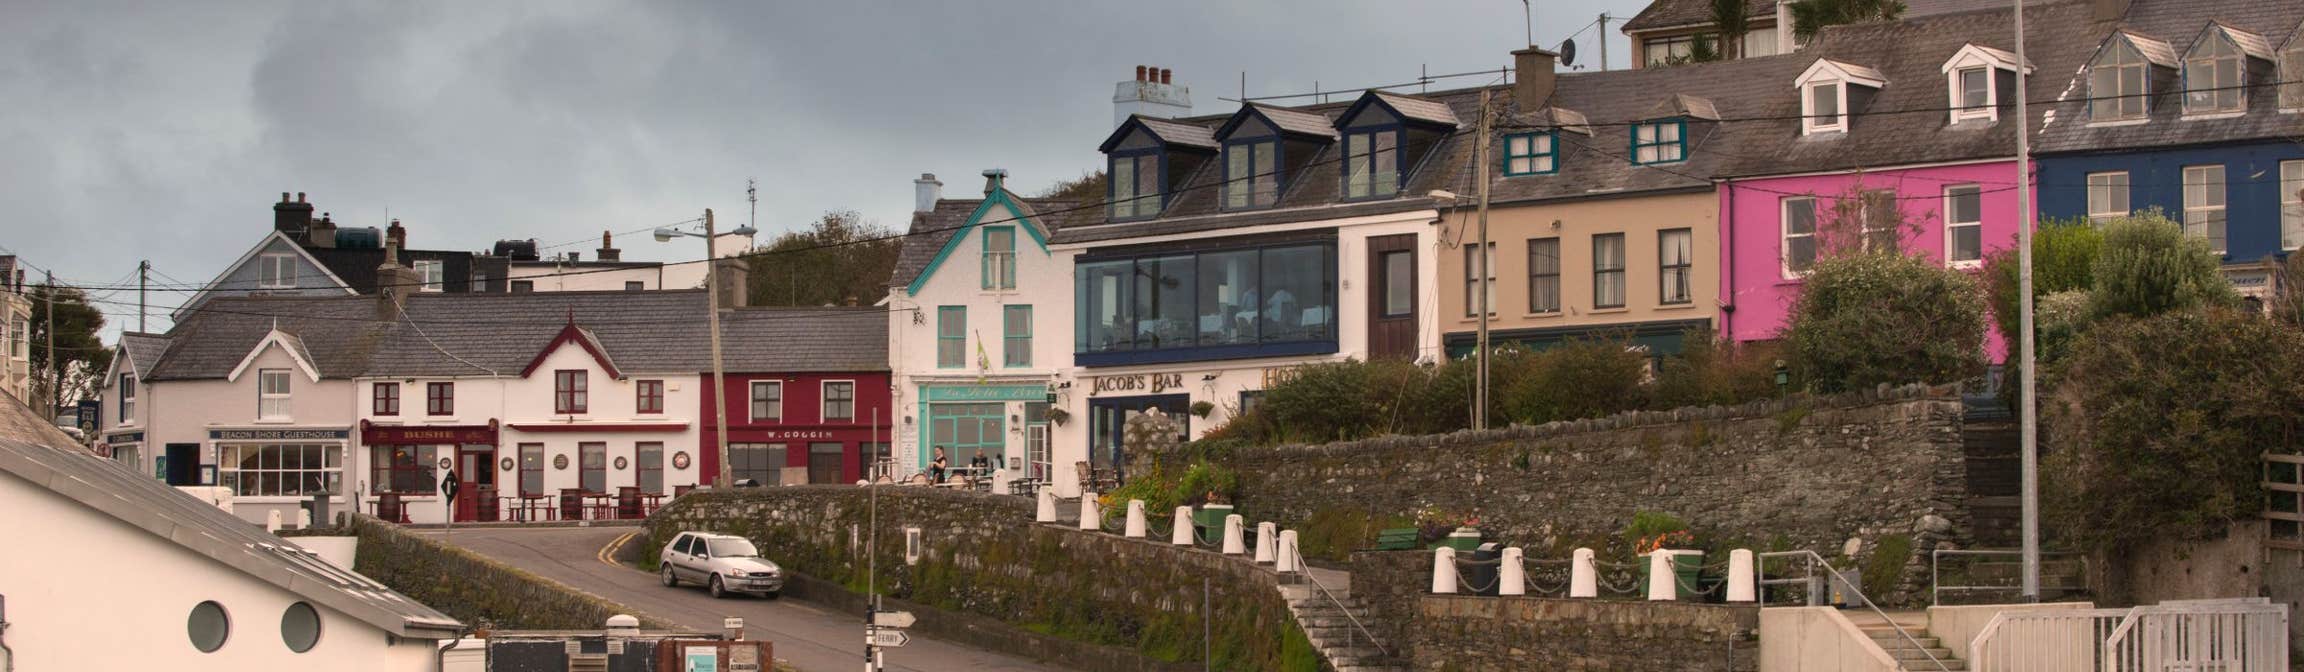 Image of Baltimore village in County Cork